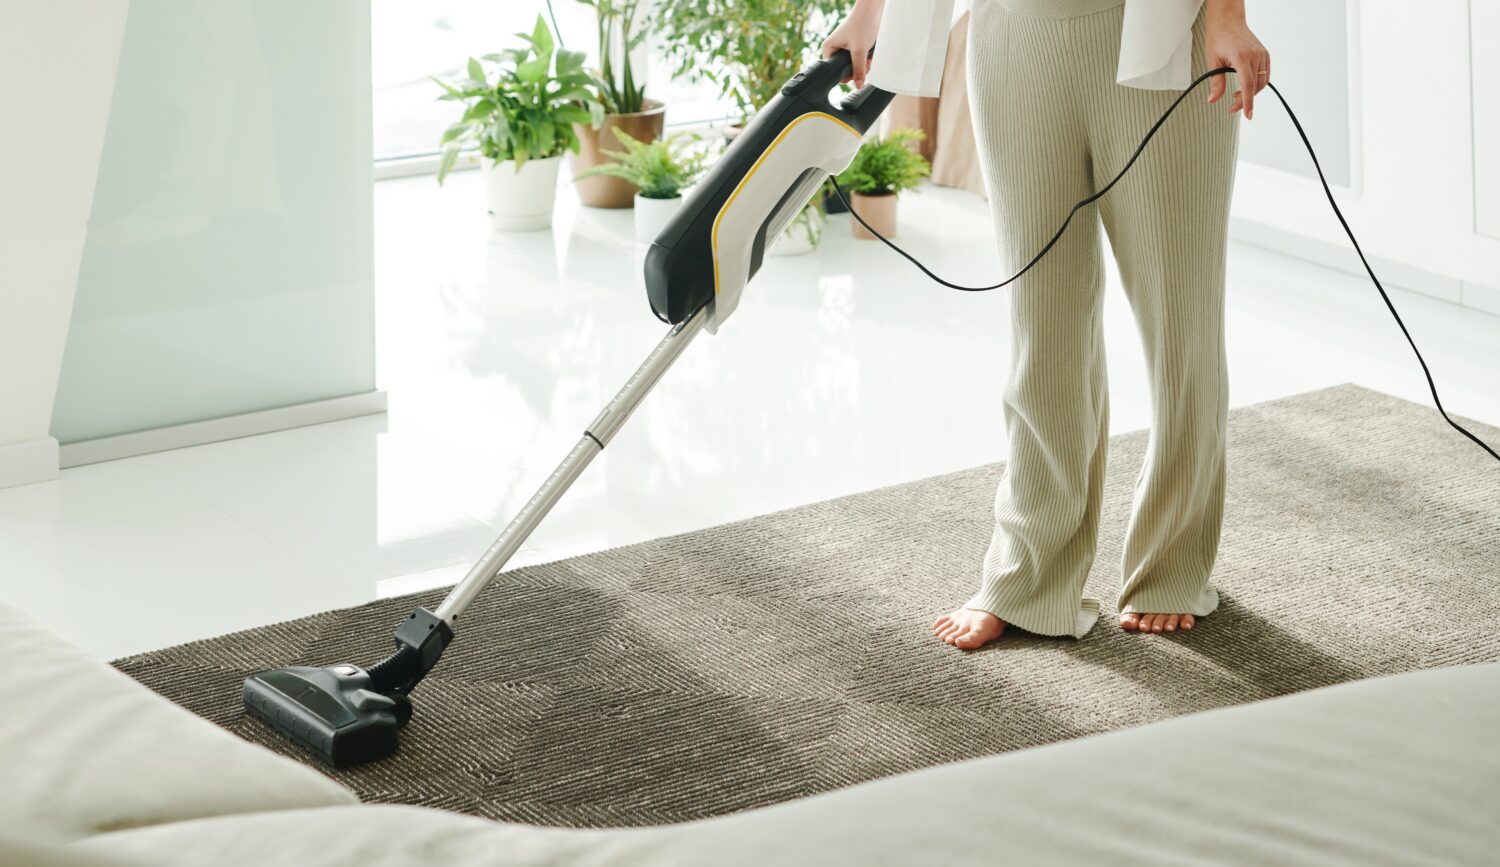 This homeowner chooses the bagless vacuum cleaner as the best vacuum for keeping her area rugs dirt free.